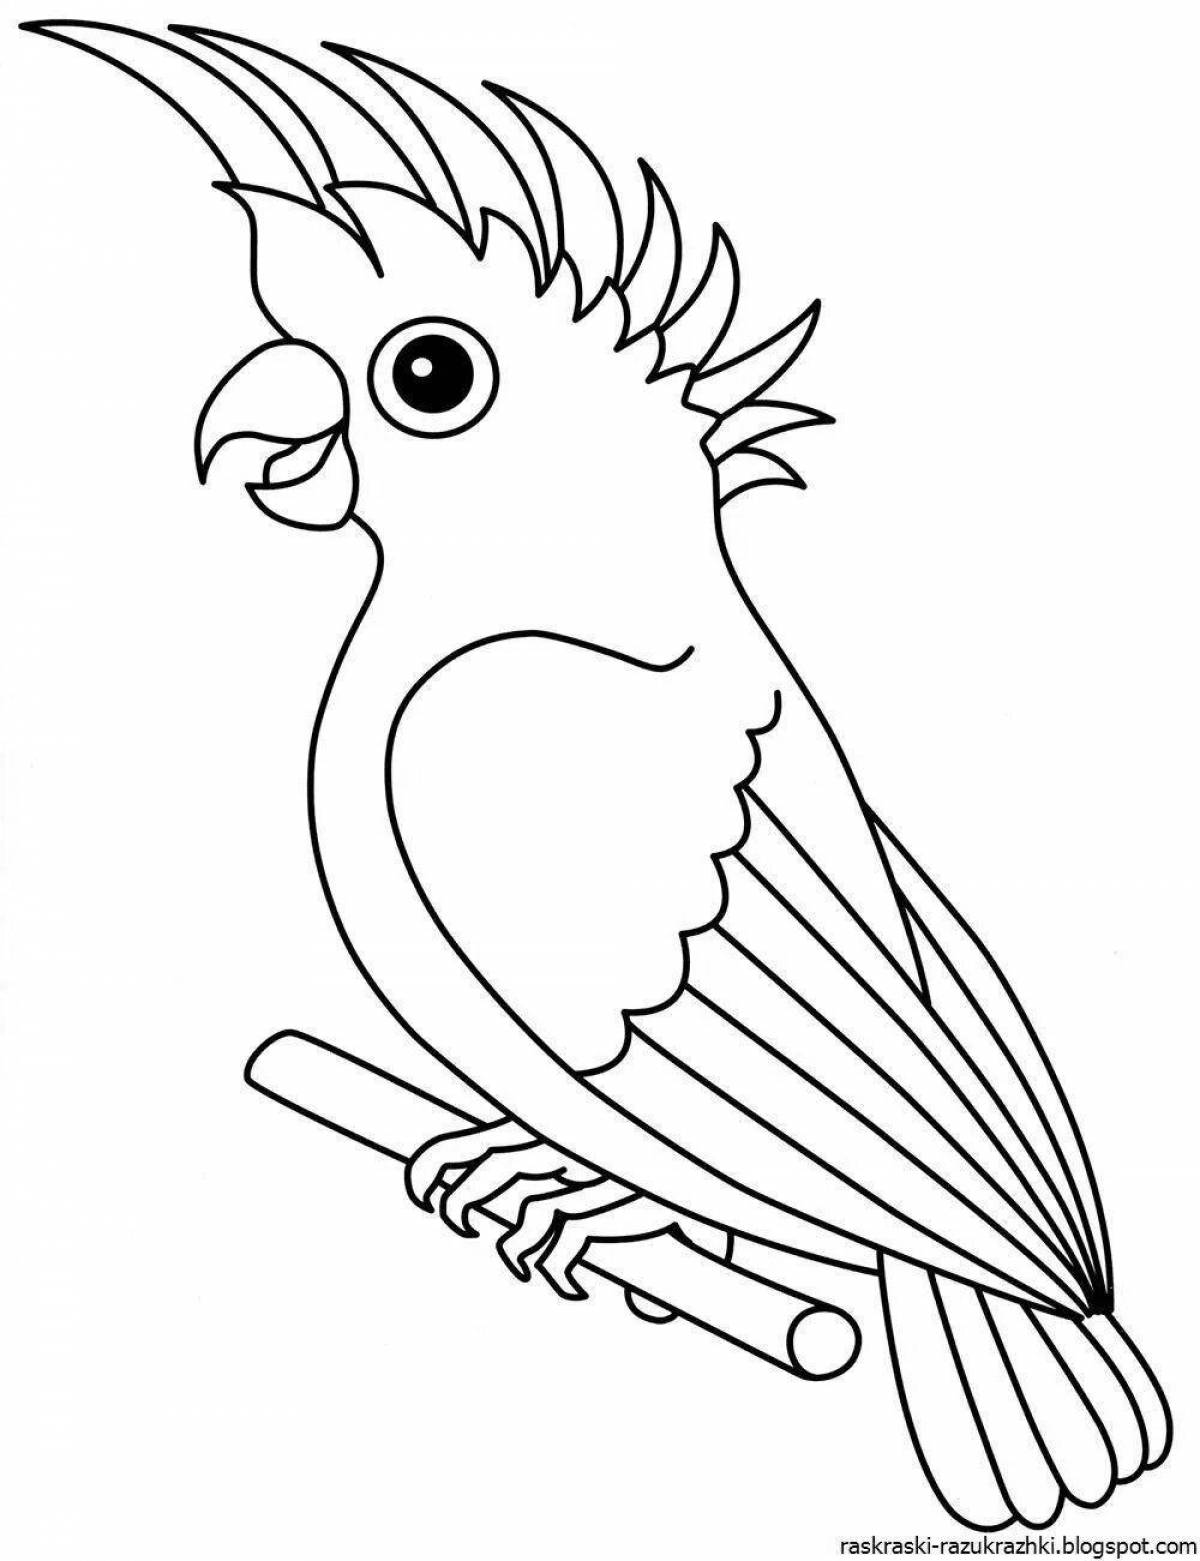 Coloring parrot for children 3-4 years old